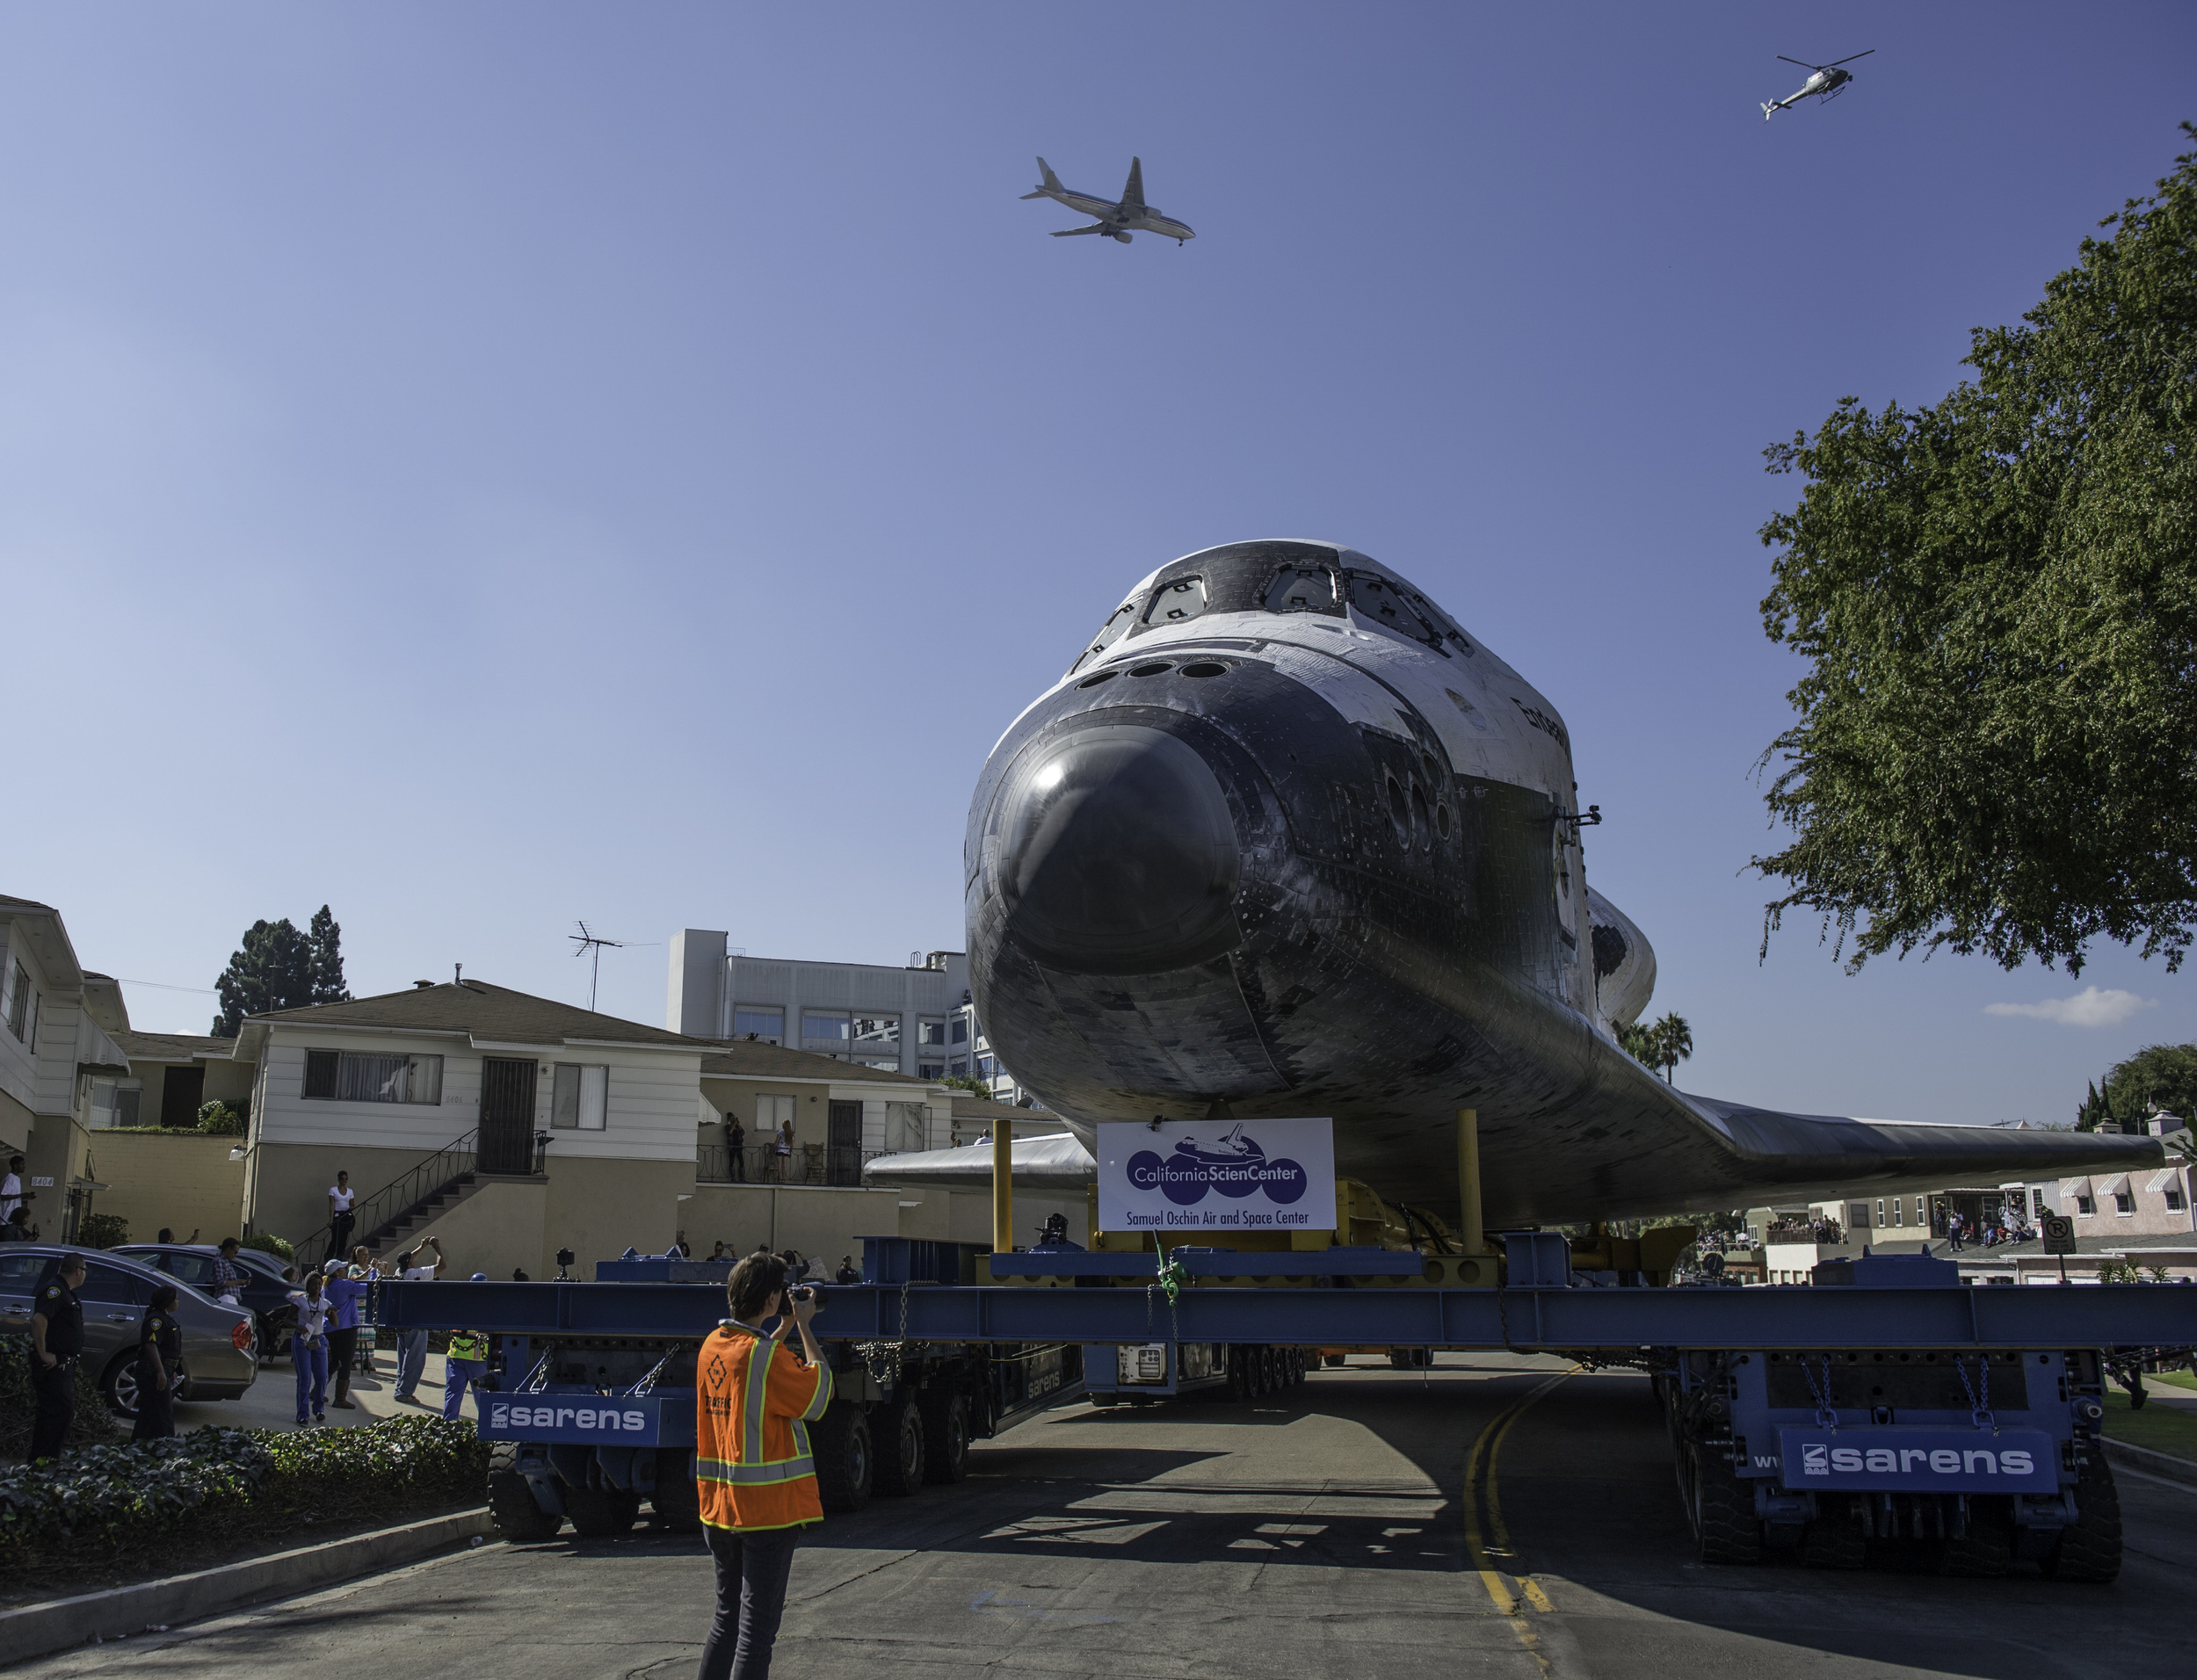  Space shuttle Endeavour is seen on the streets of Inglewood, CA on Saturday, Oct. 13, 2012. Endeavour, built as a replacement for space shuttle Challenger, completed 25 missions, spent 299 days in orbit, and orbited Earth 4,671 times while traveling